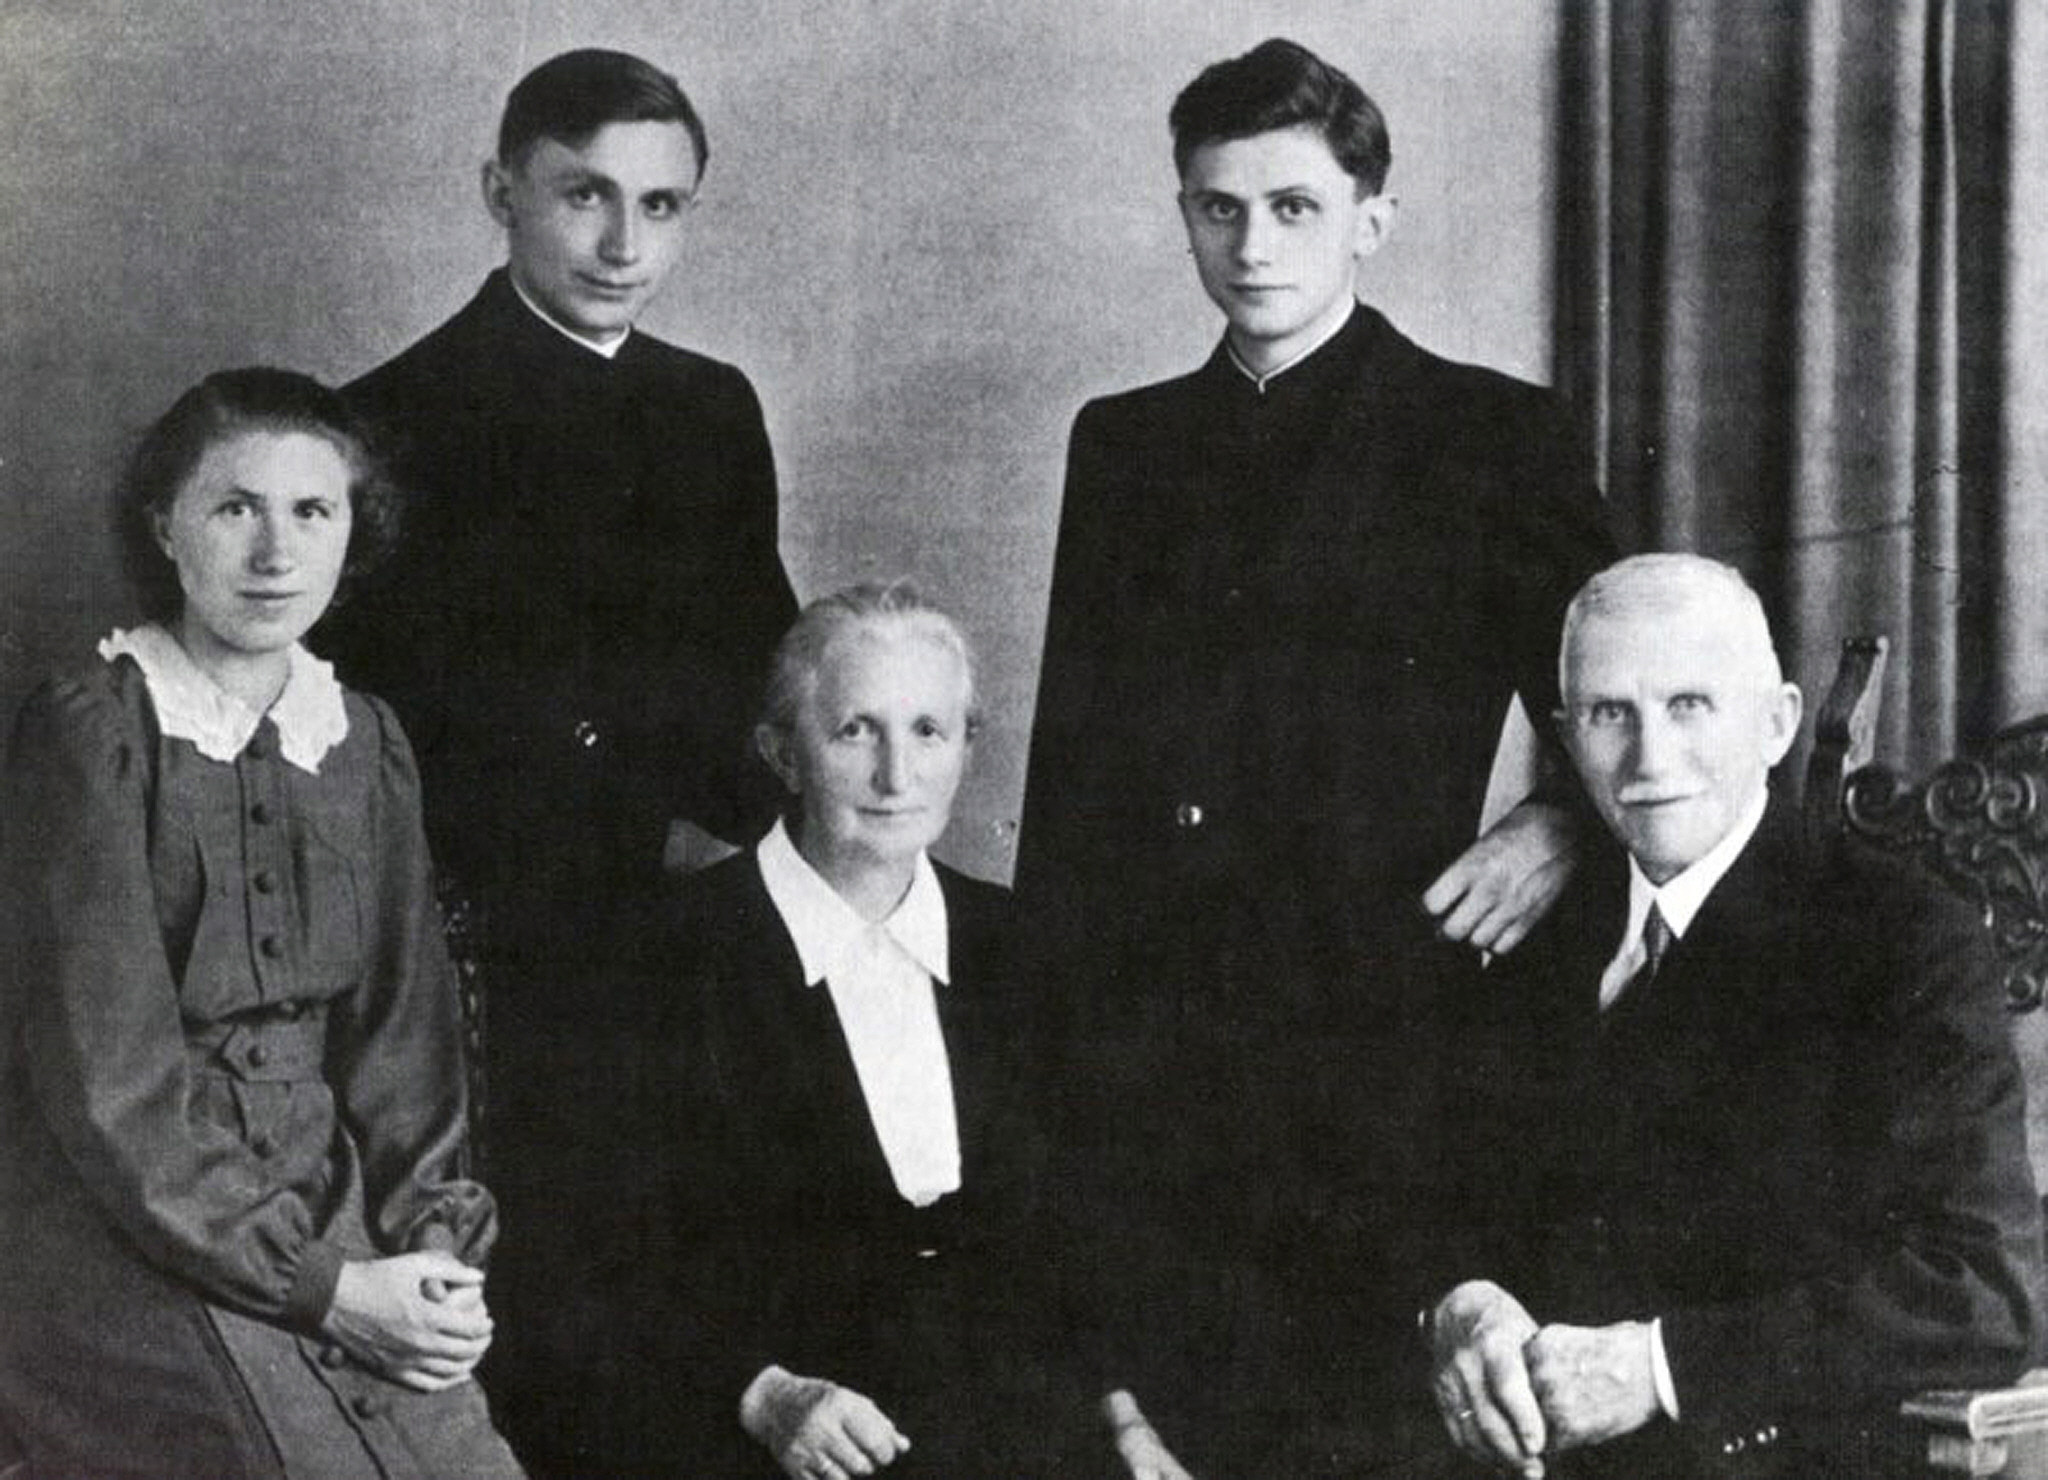 Picture taken in 1951 shows the family of Josef Ratzinger (up, R) in Freising, Bavaria, after the ordination of himself and his brother Georg (up L). Germany's Cardinal Joseph Ratzinger was elected the 265th pope of the Roman Catholic Church on 19 April 2005 and took the name Benedict XVI. Bottom row : his sister Maria, his Mother Maria and his father Josef.